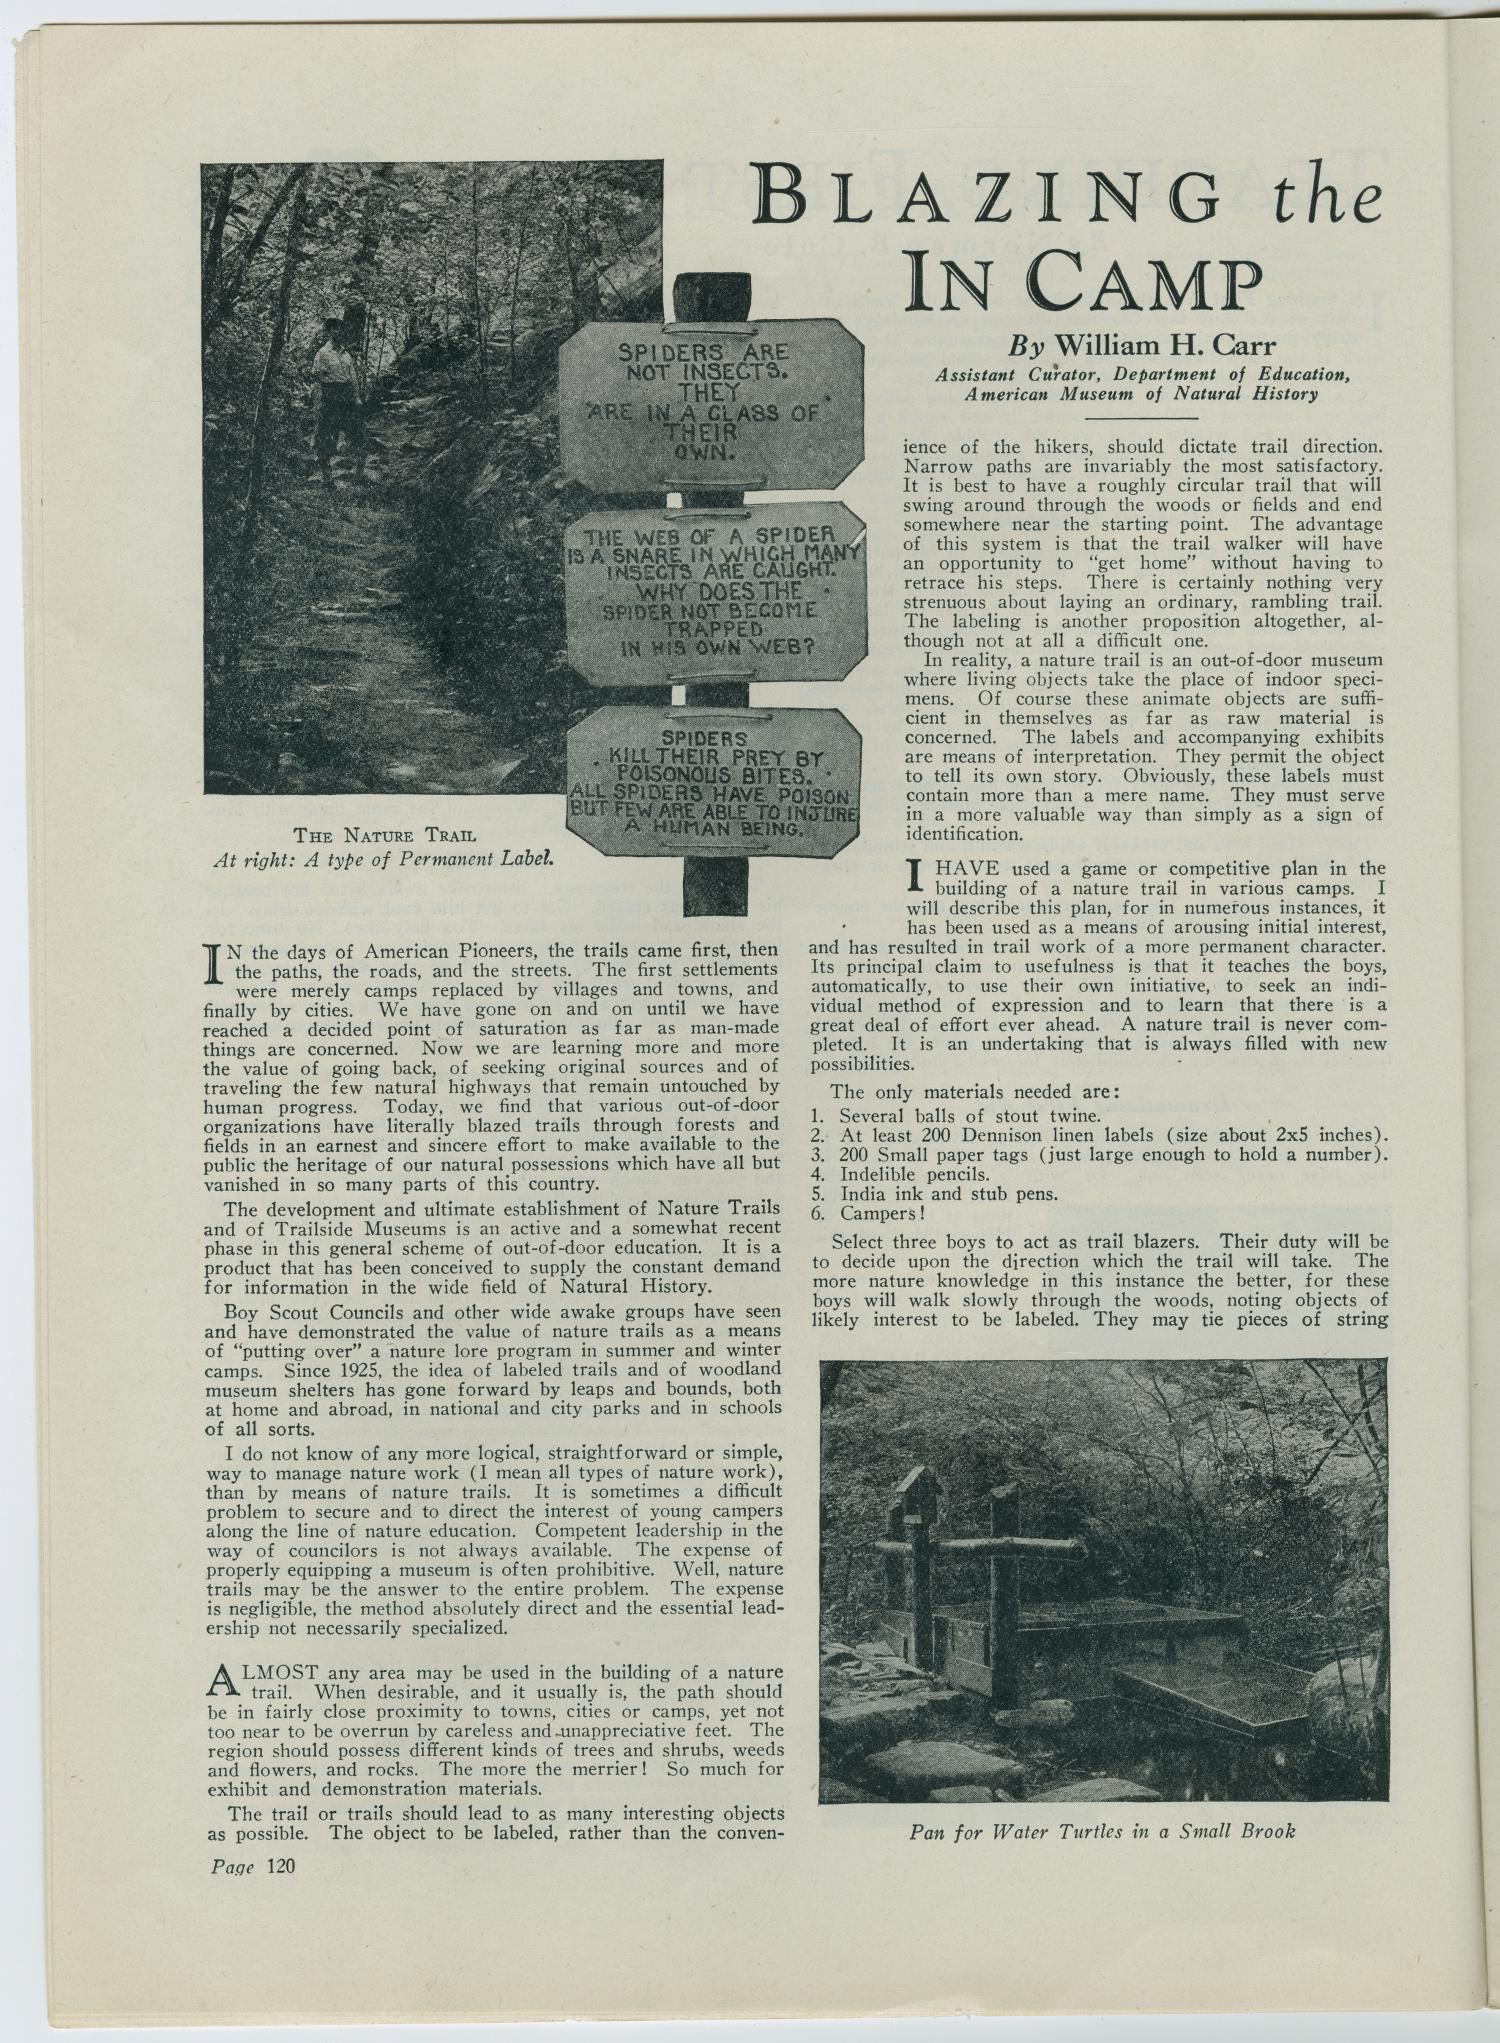 Scouting, Volume 18, Number 5, May 1930
                                                
                                                    120
                                                